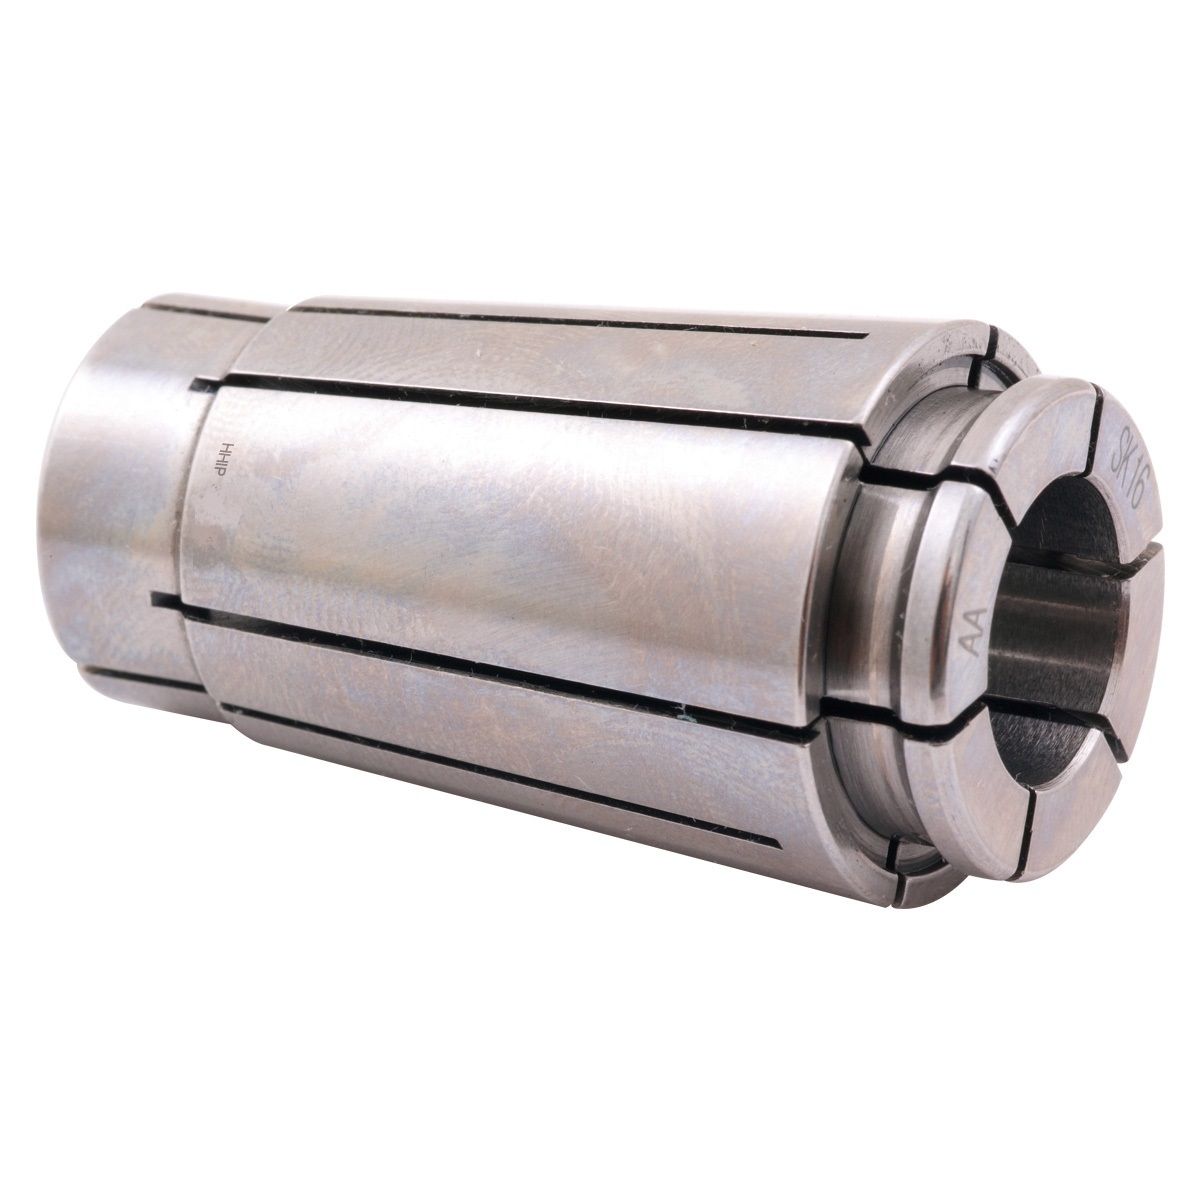 PRO-SERIES 1/4" SK16 LYNDEX STYLE COLLET (3901-5439)